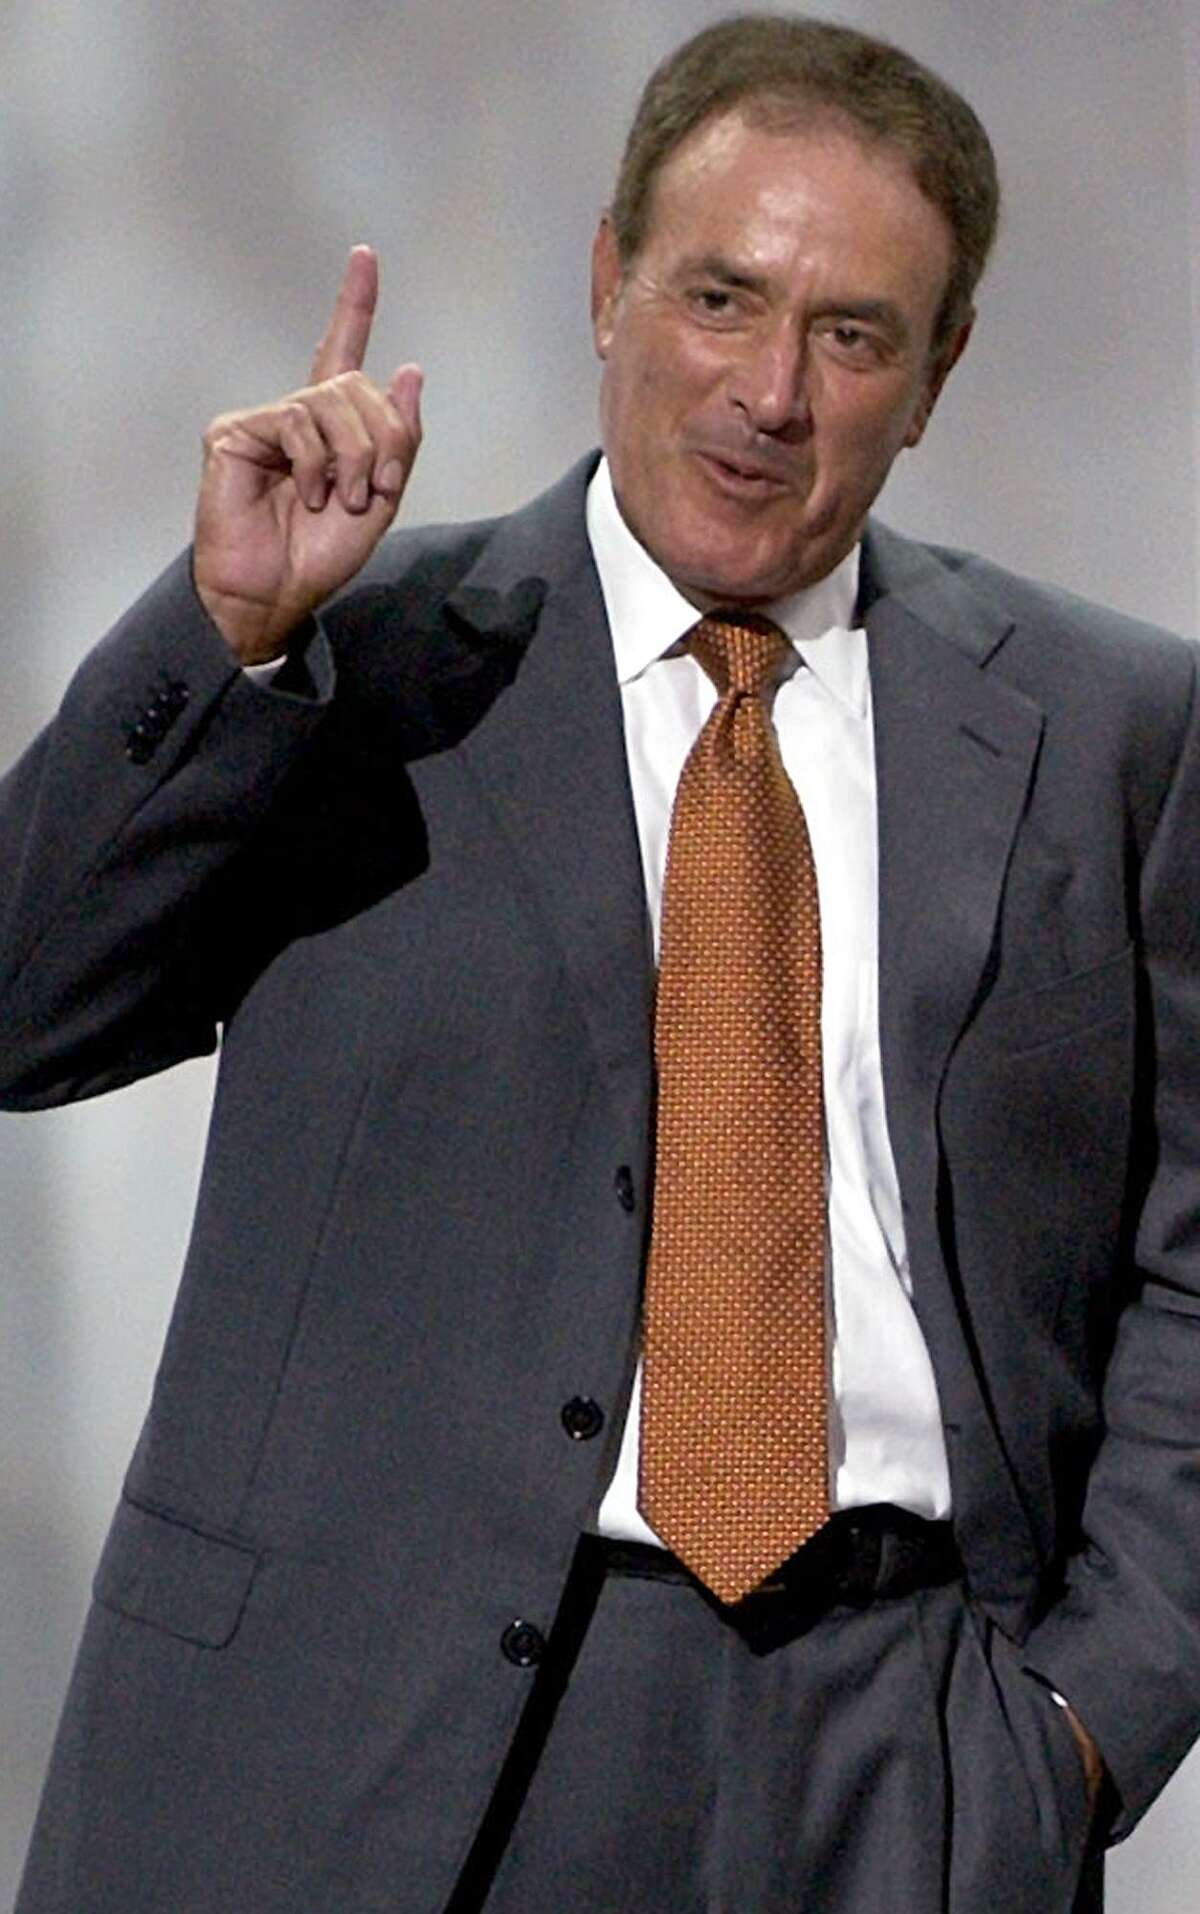 Al Michaels appears at the 11th annual ESPY Awards, July 16, 2003, in Los Angeles.